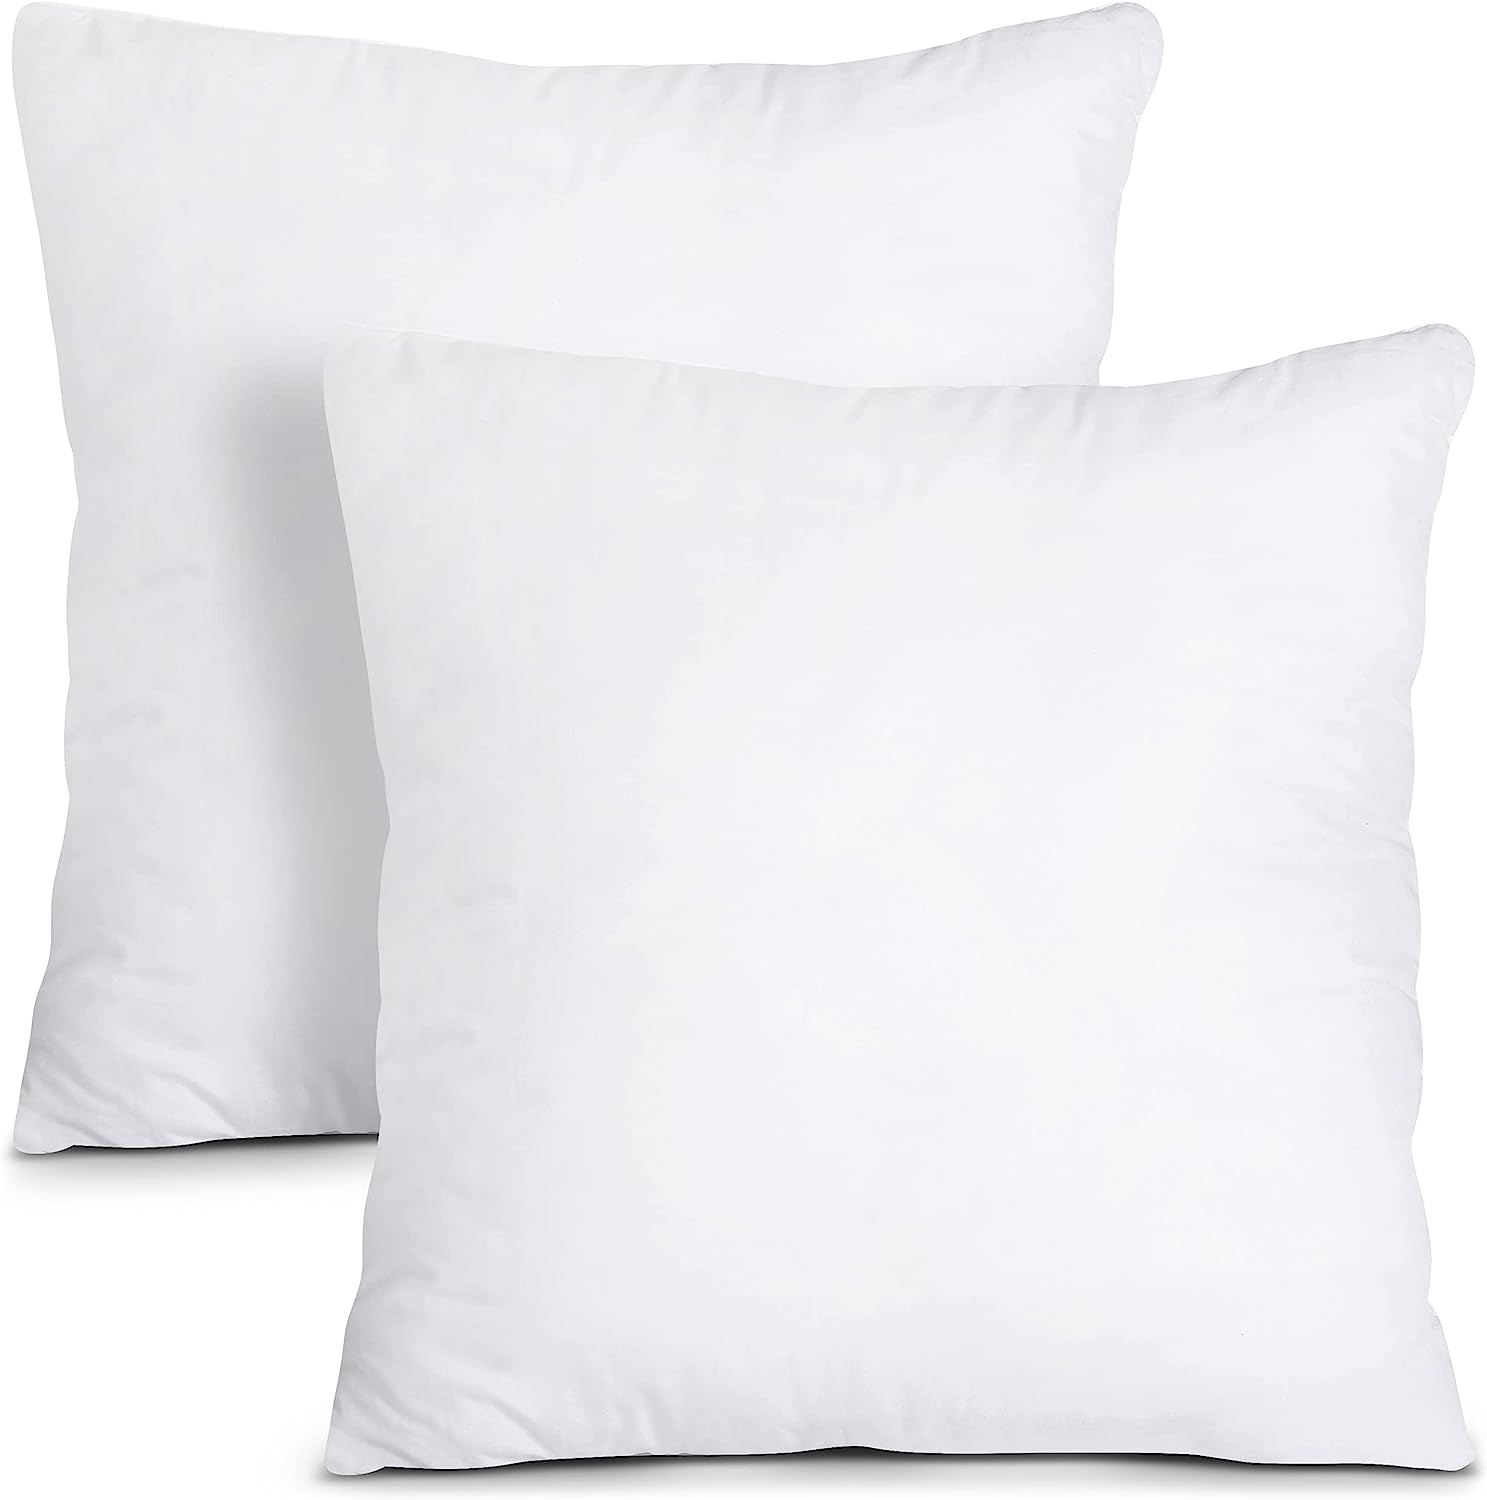 Basic Home 14x14 Decorative Throw Pillow Inserts-Down Feather Pillow Inserts-Square-Cotton Fabric-Set of 2-White.